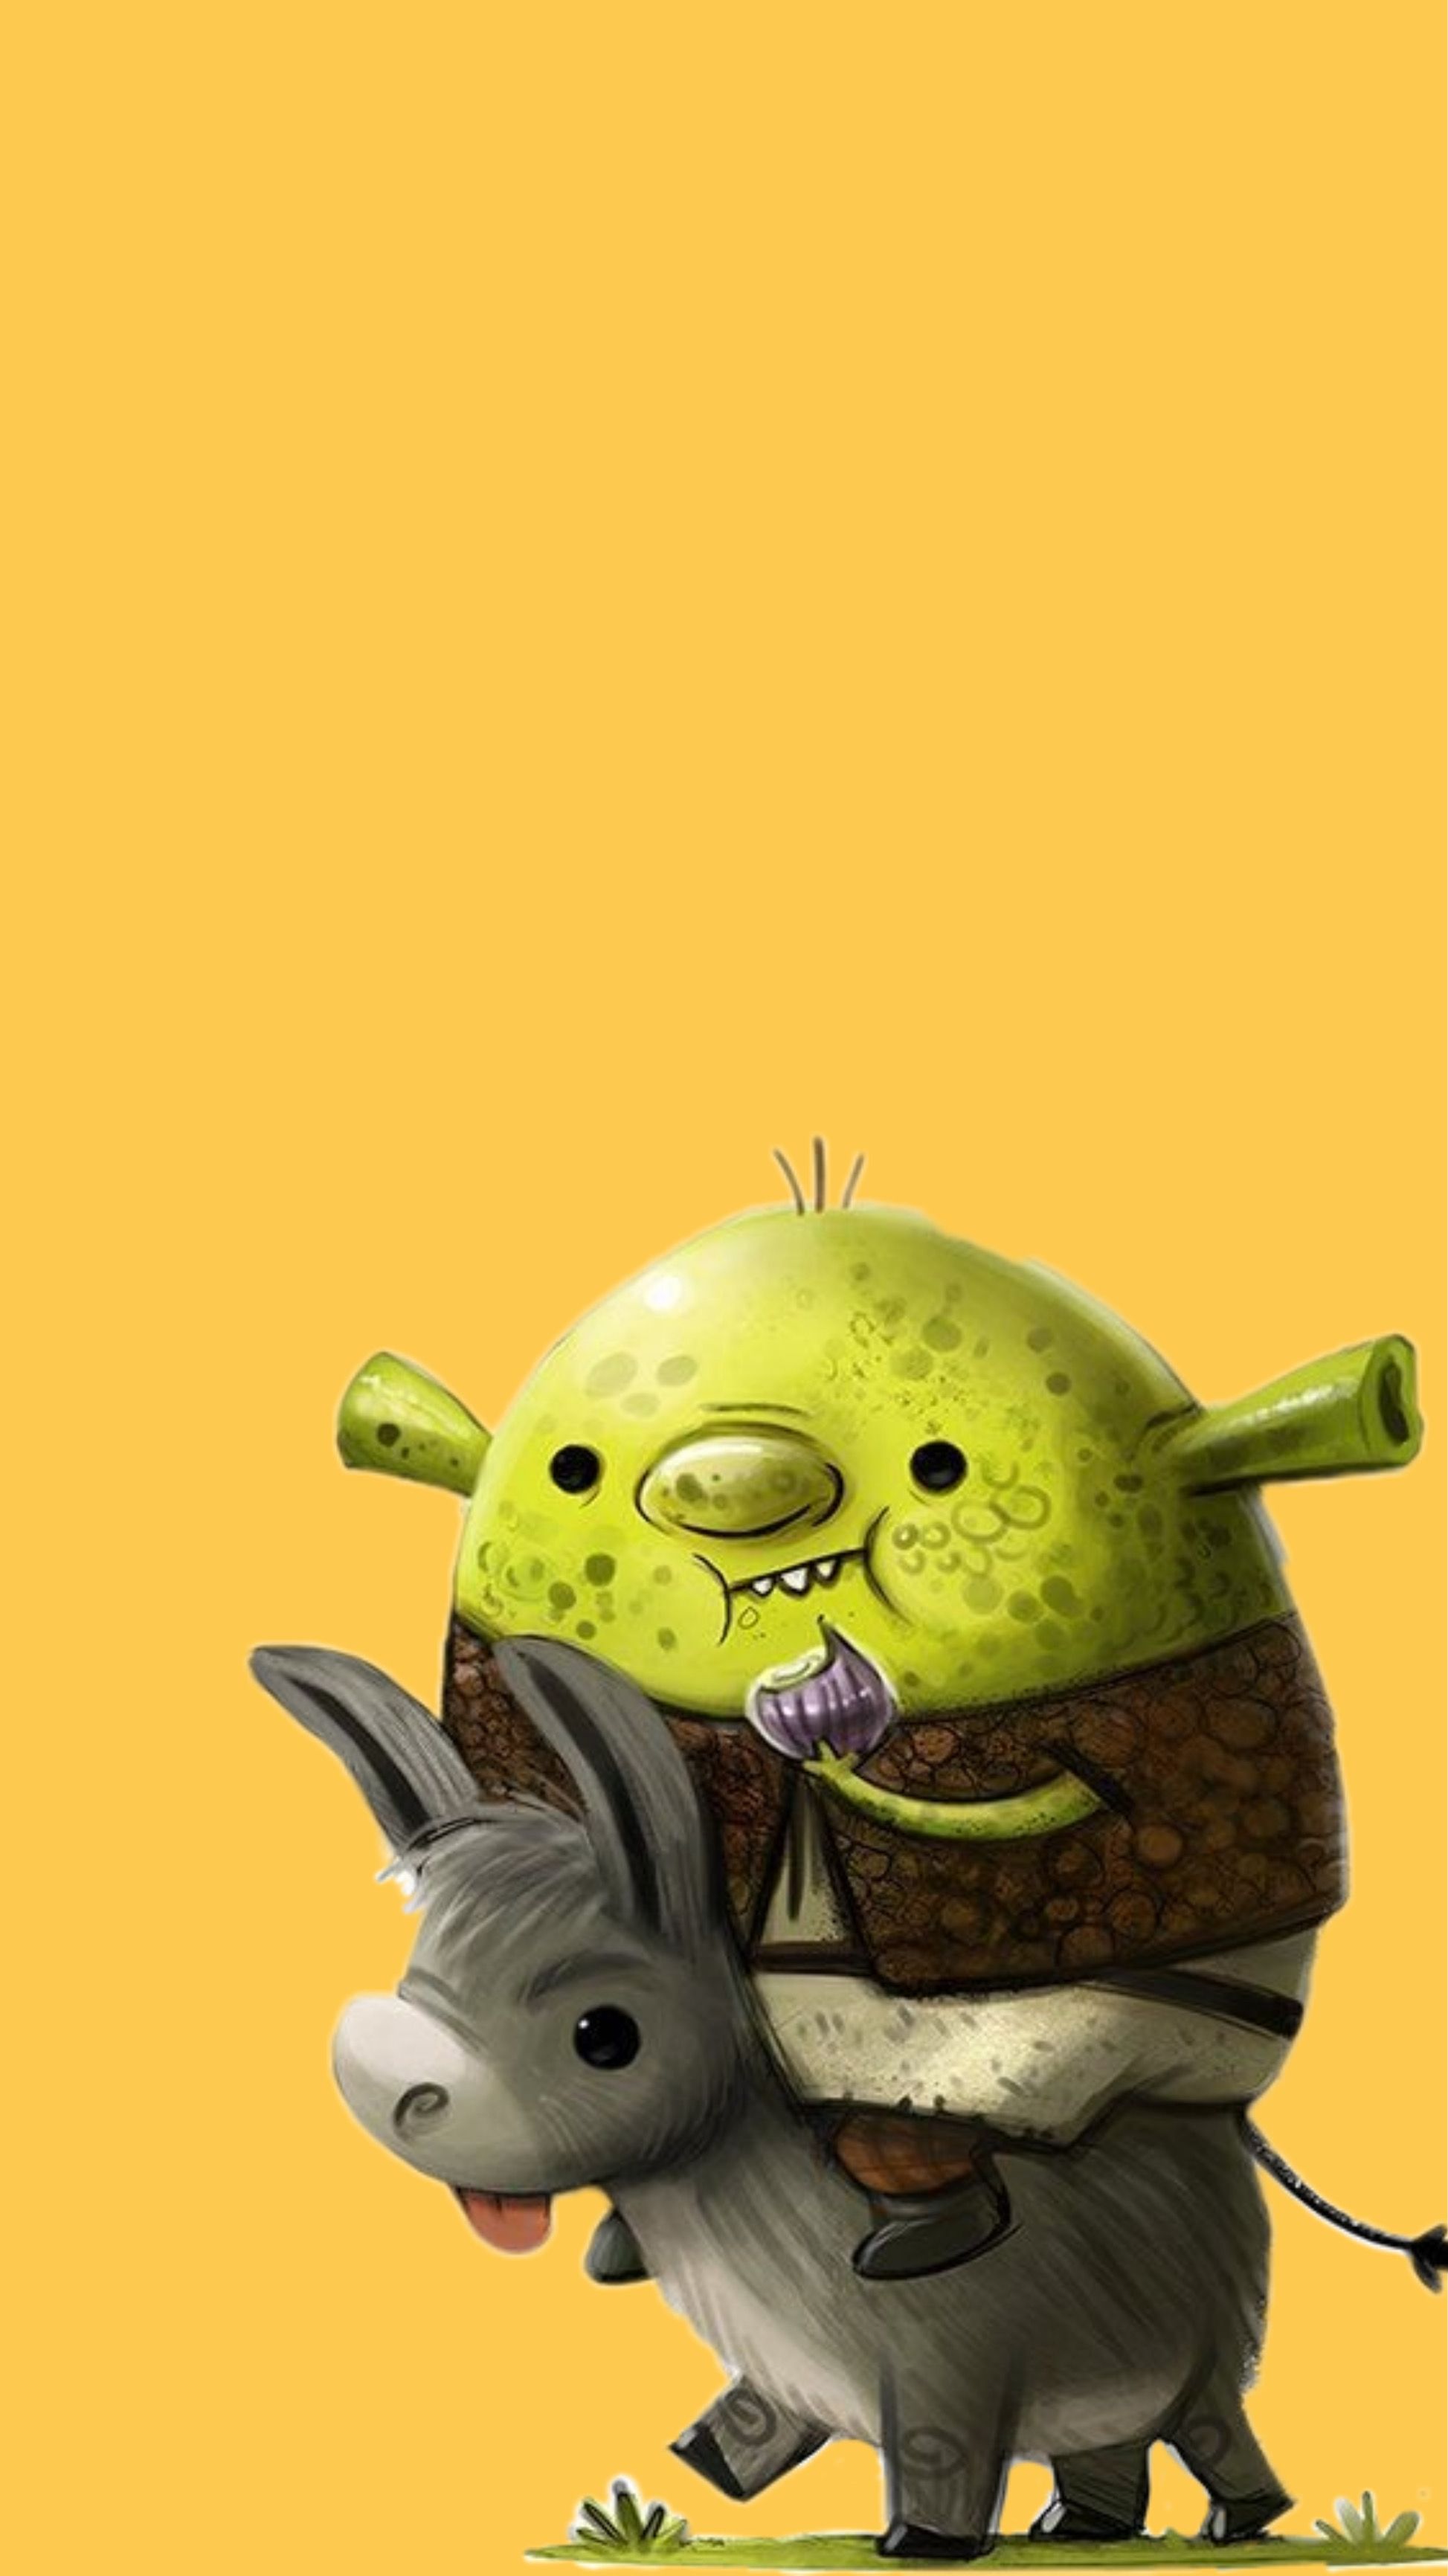 Cute shrek and donkey wallpaper for iPhone with resolution 1080x1920 pixel. You can make this wallpaper for your iPhone 5, 6, 7, 8, X backgrounds, Mobile Screensaver, or iPad Lock Screen - Shrek